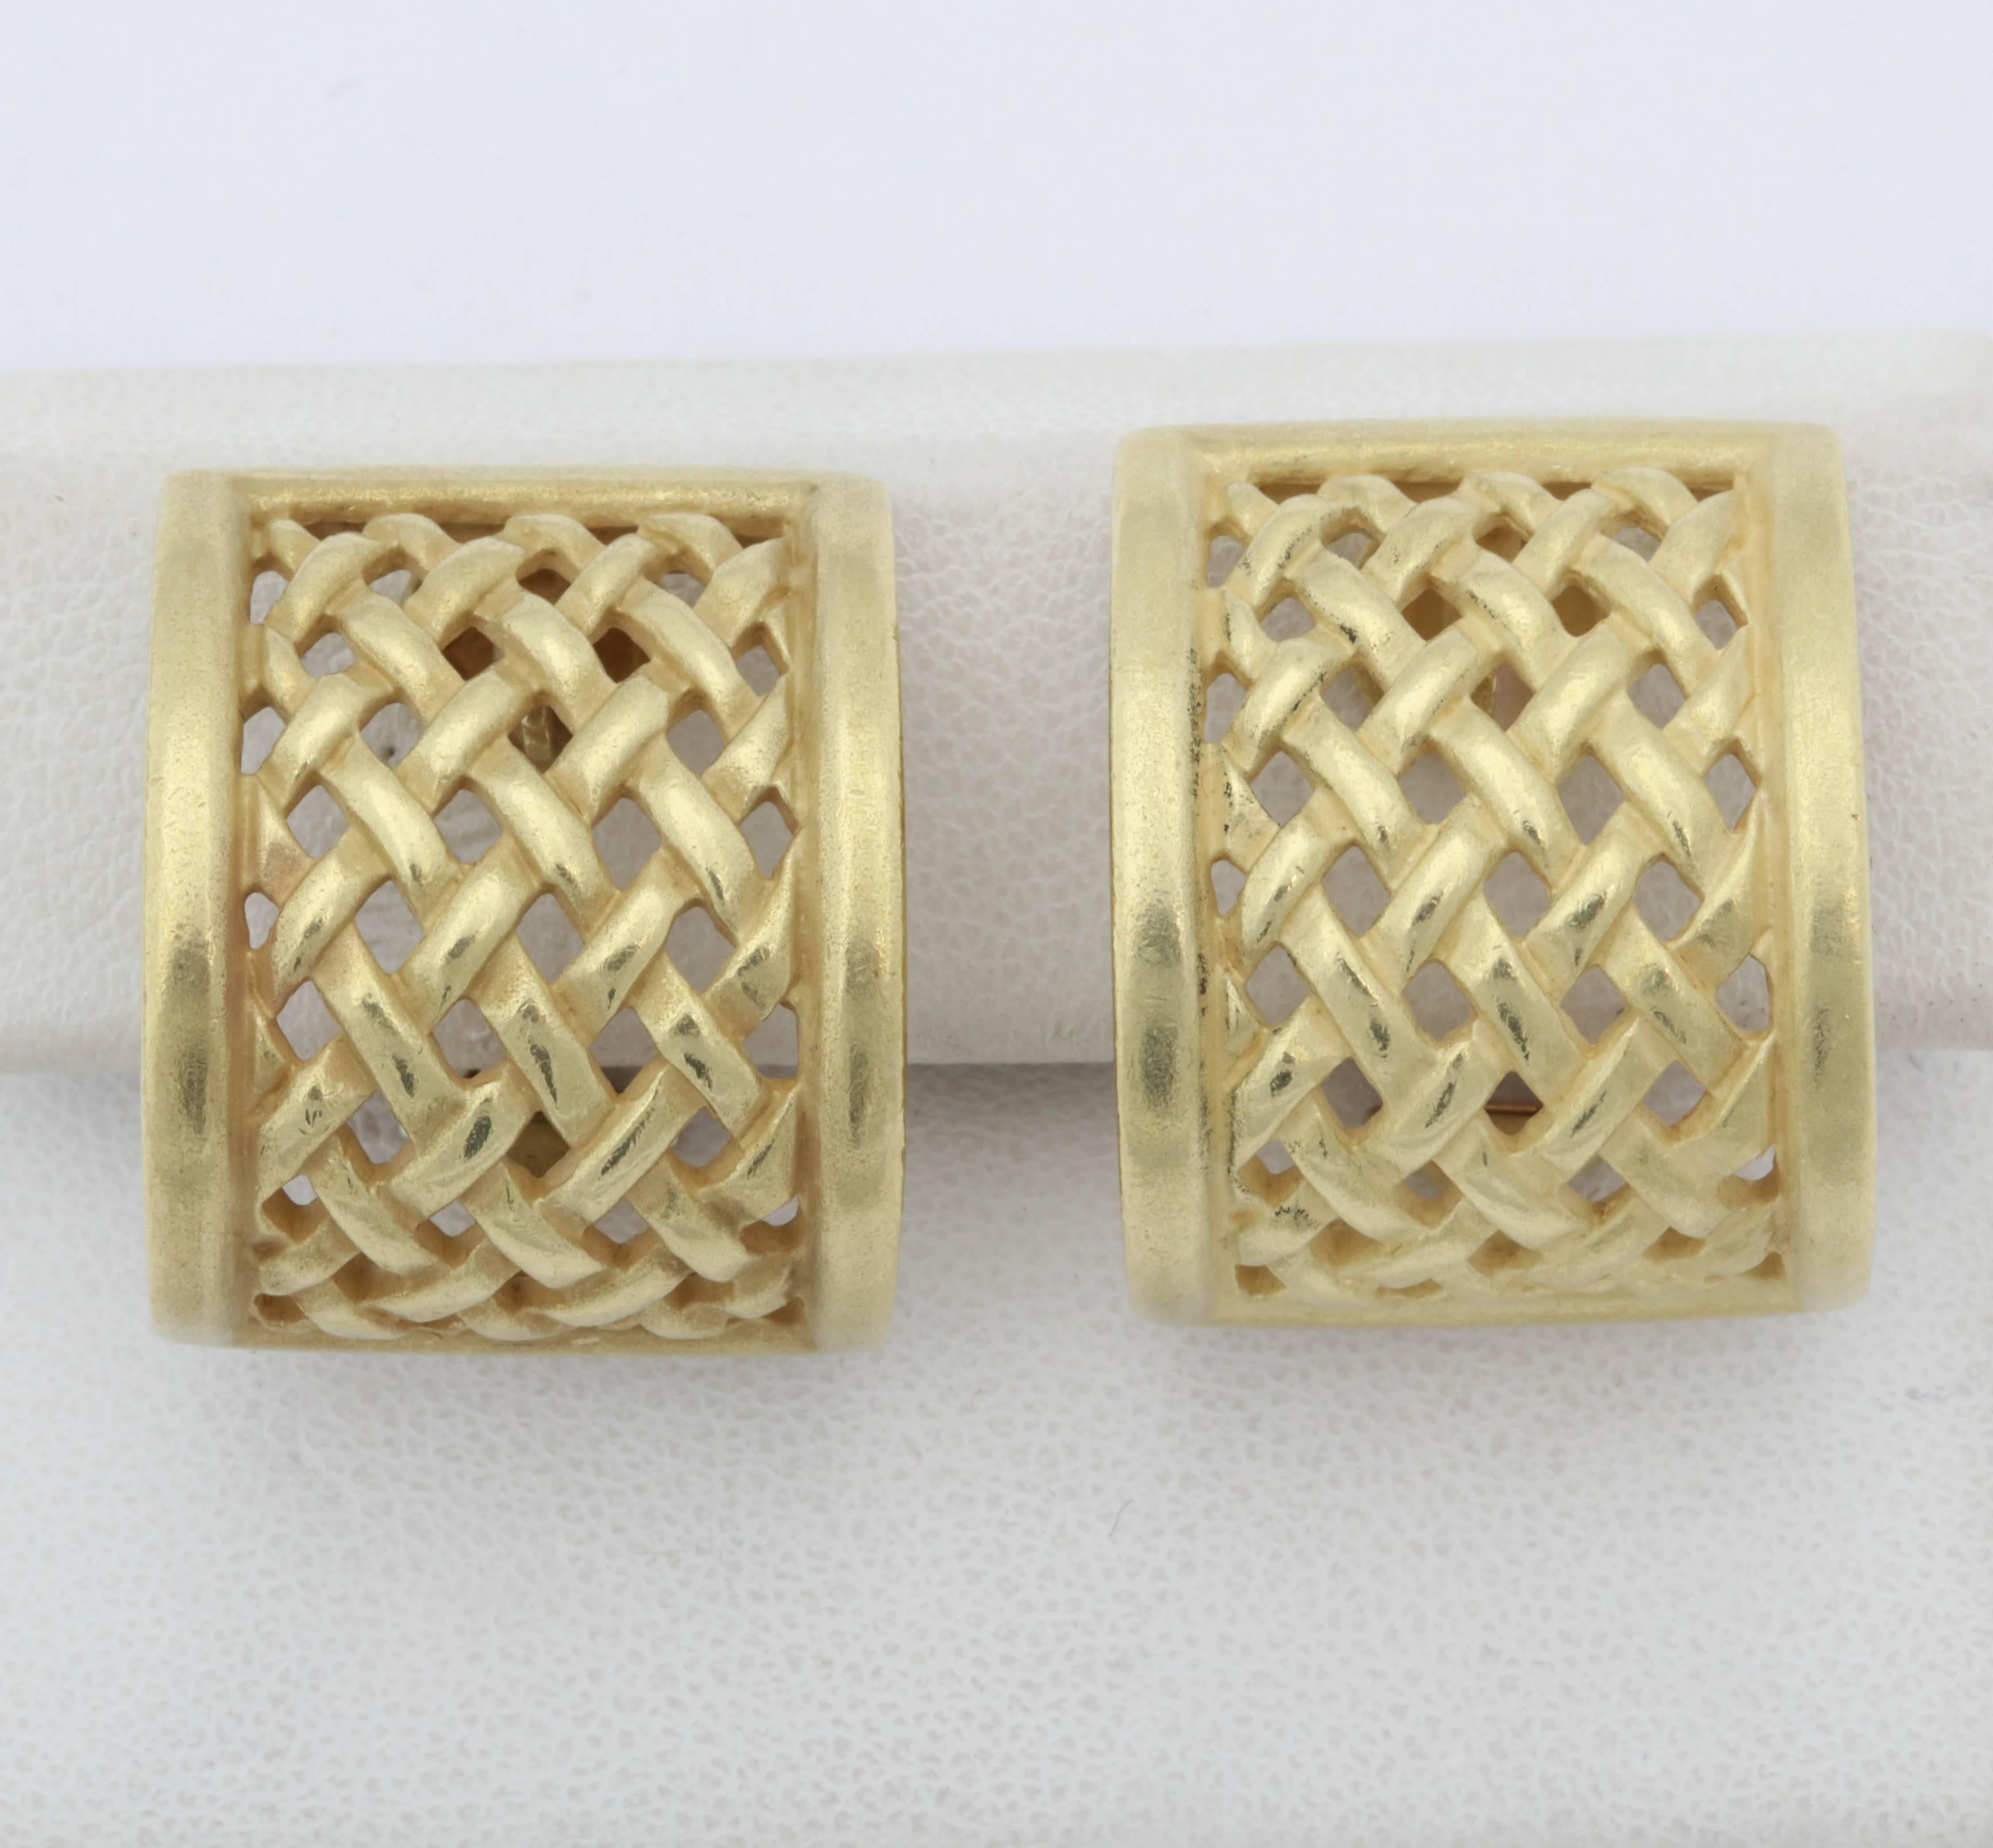 One Pair Of Bold Ladies Unusual 18kt Green Gold Basket Weave Pattern  Half Hoop Earrings With Clip On Backs. Note These Earrings May easily Have posts added for Pierced Ears. Designed By Barry Kiselstein Cord In The 1980's.Made In The United states